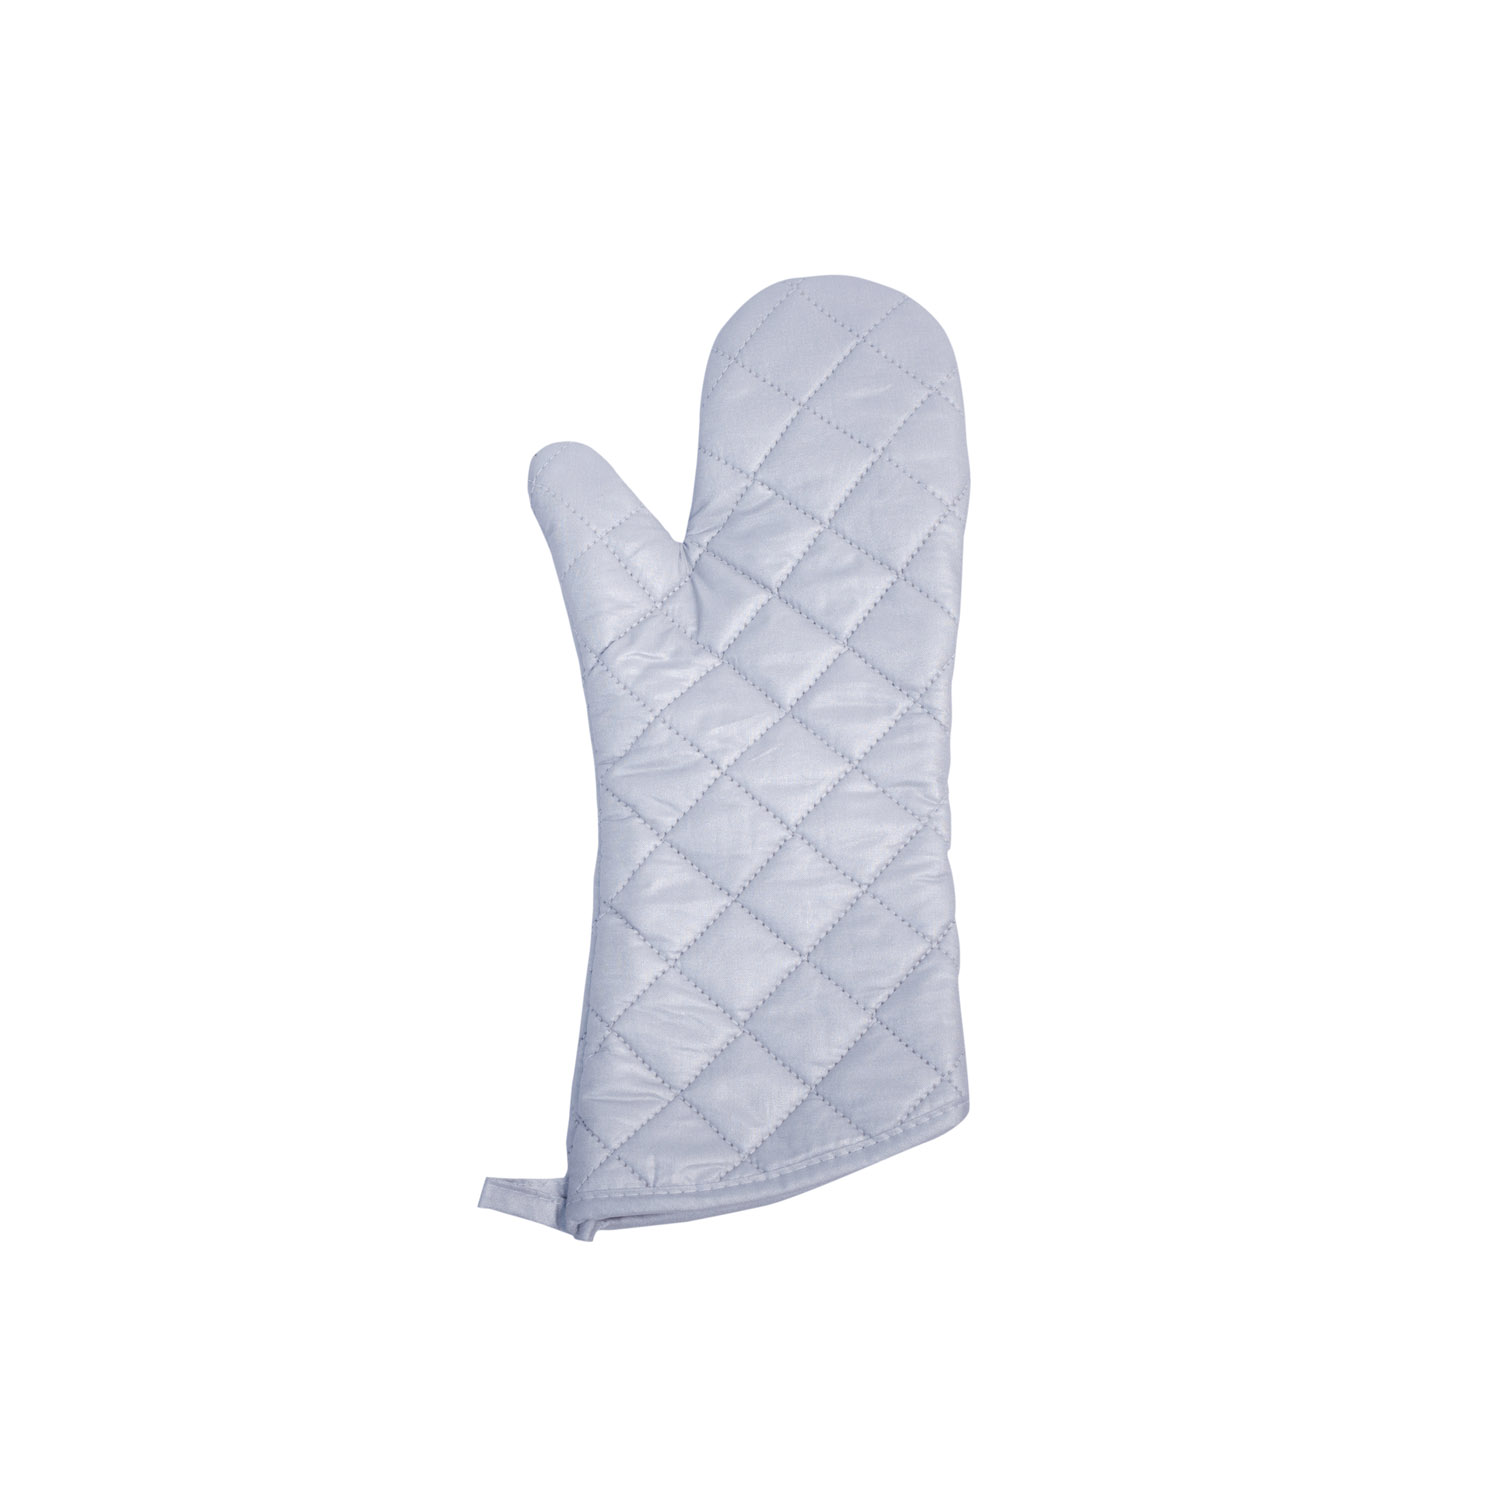 CAC China OMS1-15 Silicone-Coated Cotton Oven Mitt 15"